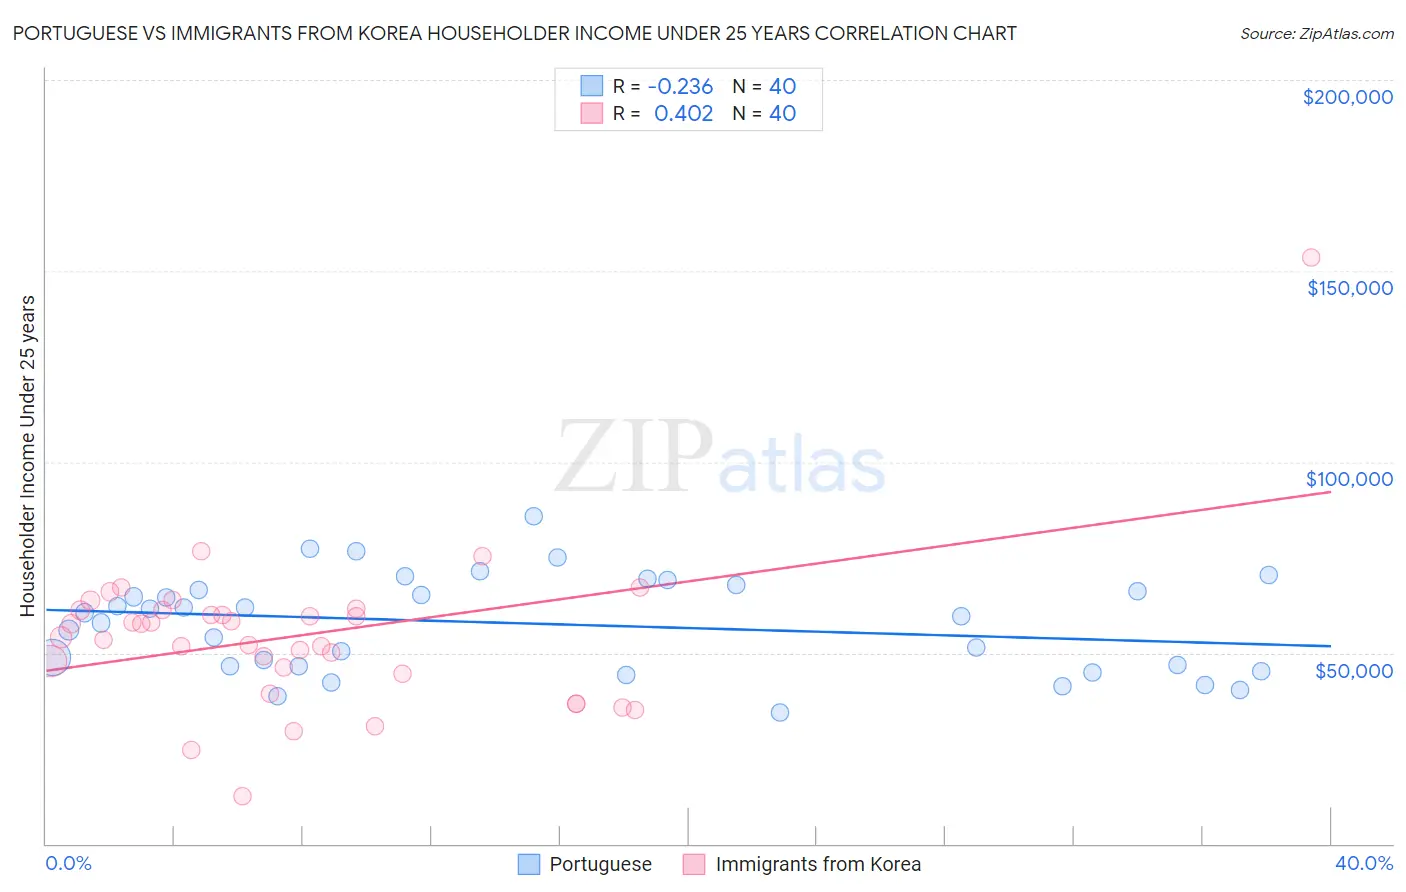 Portuguese vs Immigrants from Korea Householder Income Under 25 years